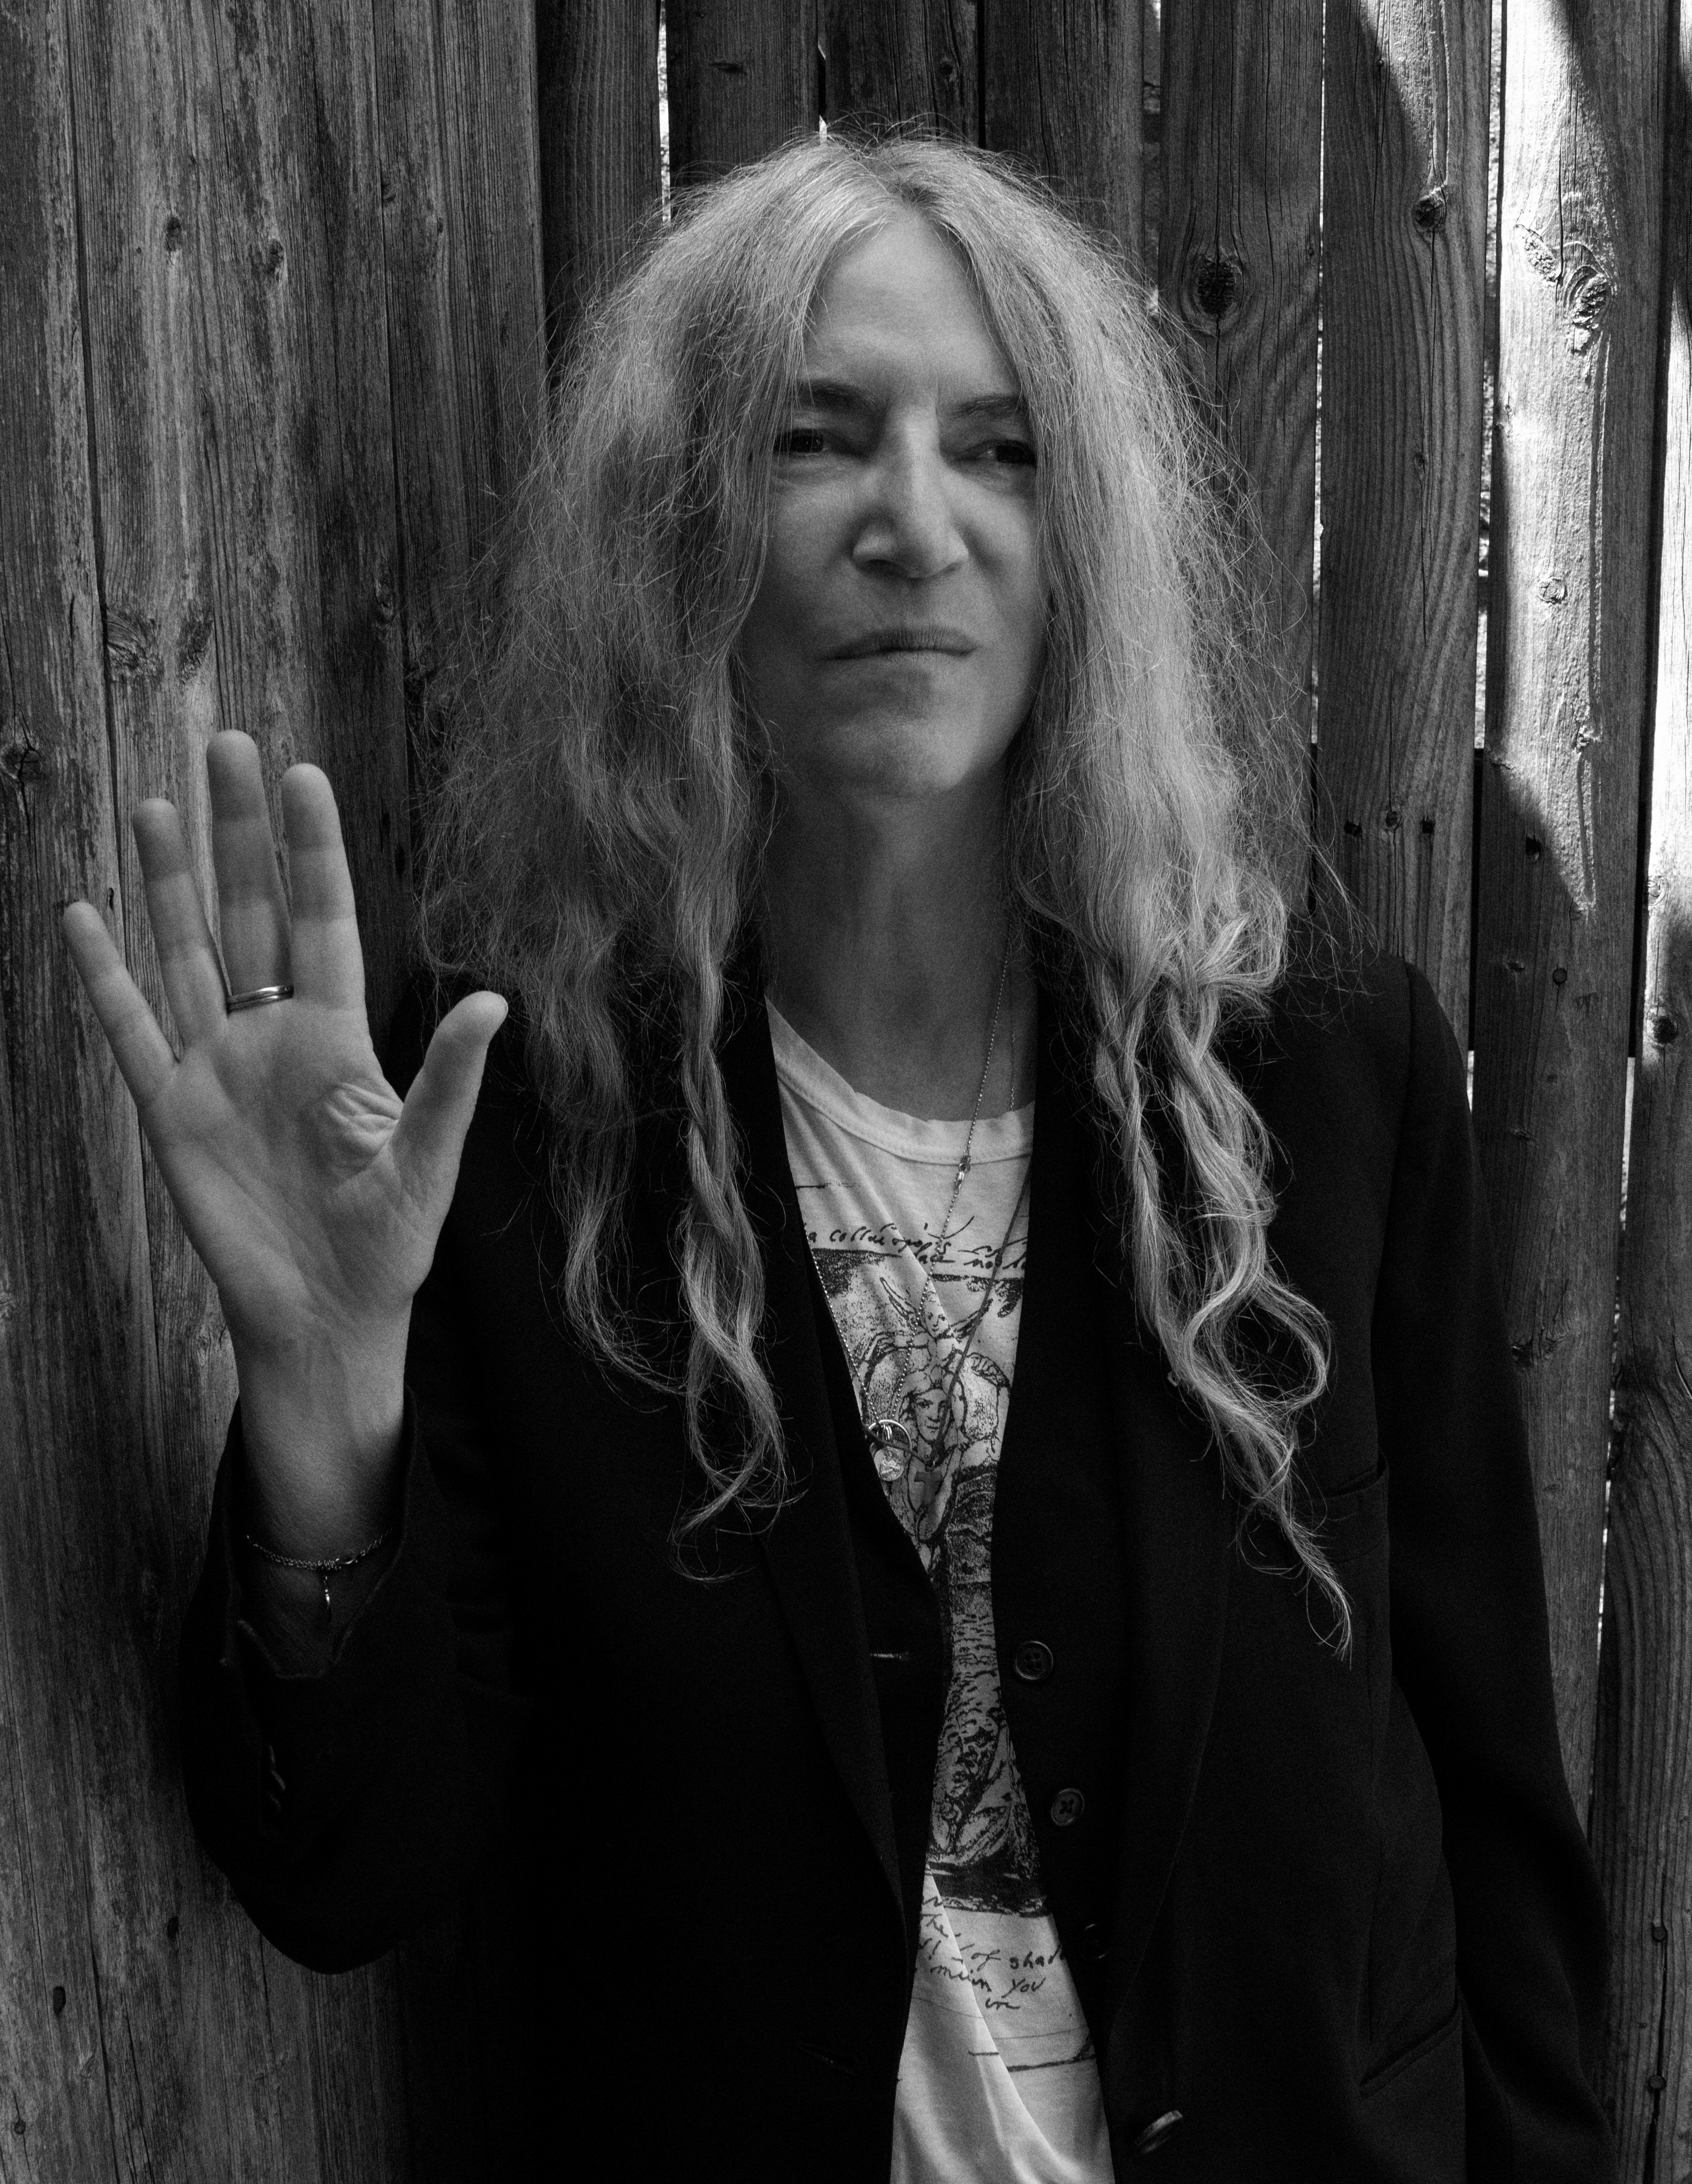 Patti Smith’s photography book is a moving window into her world